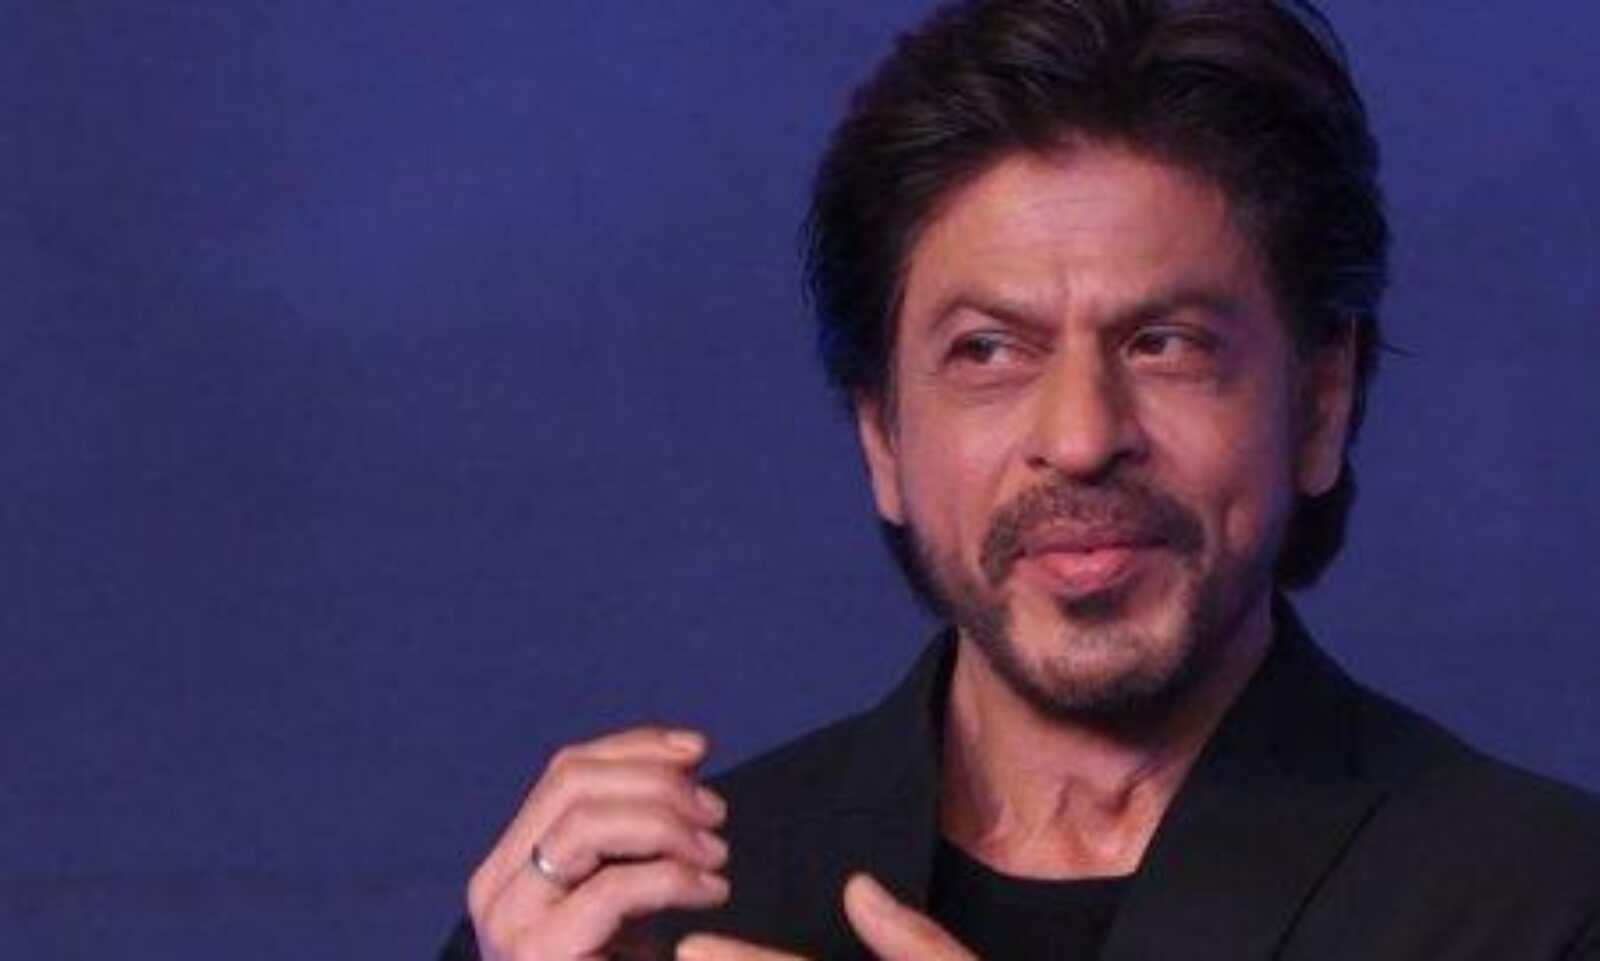 Shah Rukh Khan's Outfit For A Fan Meet Costs Close To One Crore